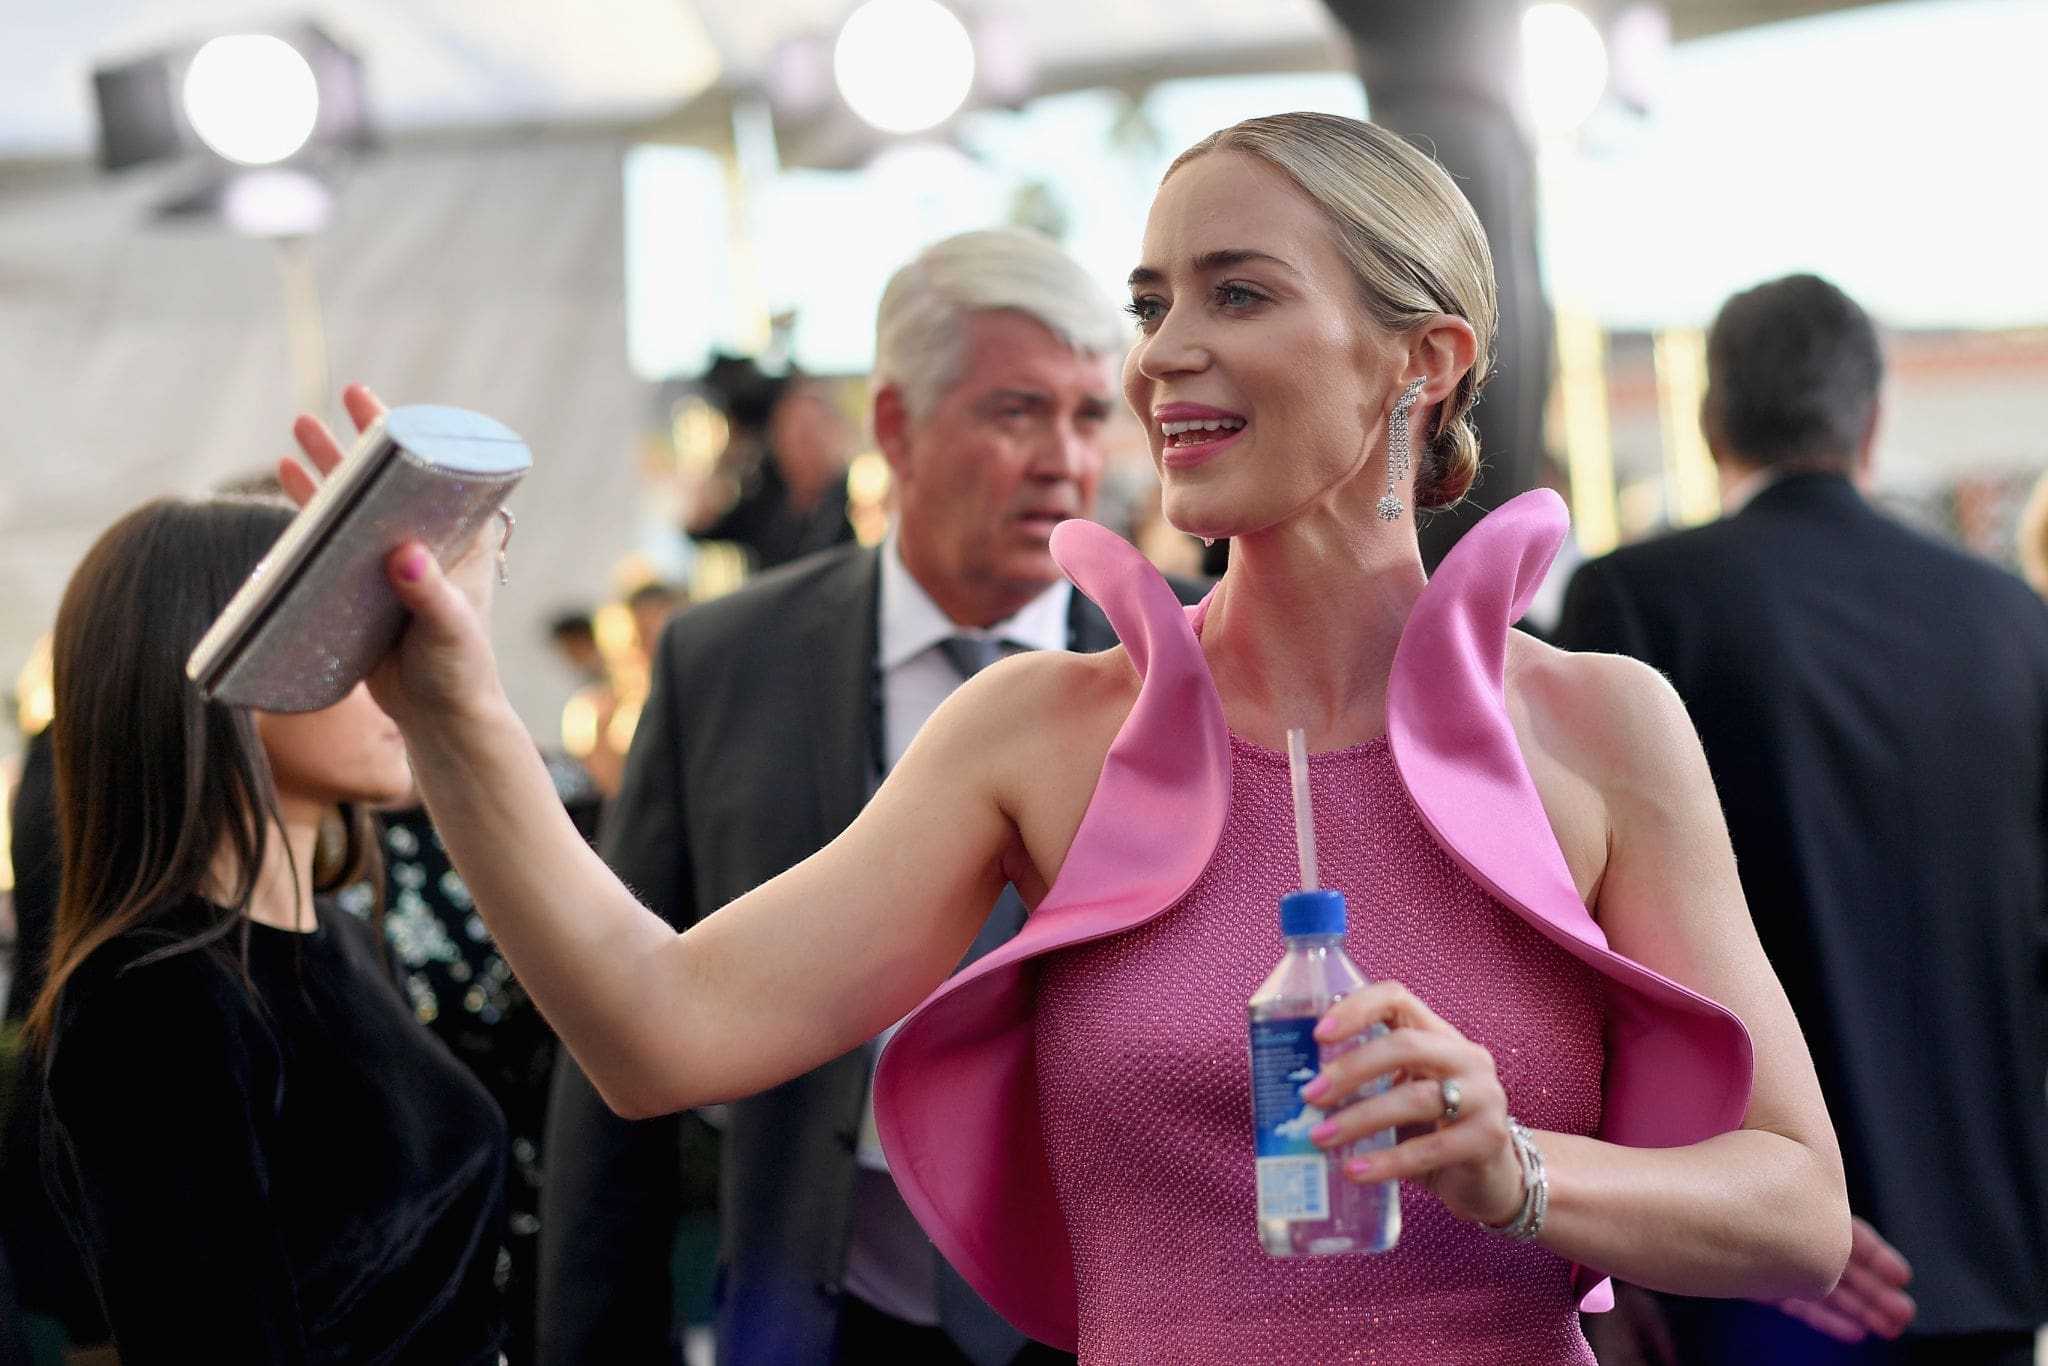 Emily_Blunt_-_25th_Annual_Screen_Actors_Guild_Awards_in_Los_Angeles_01272019-27.jpg